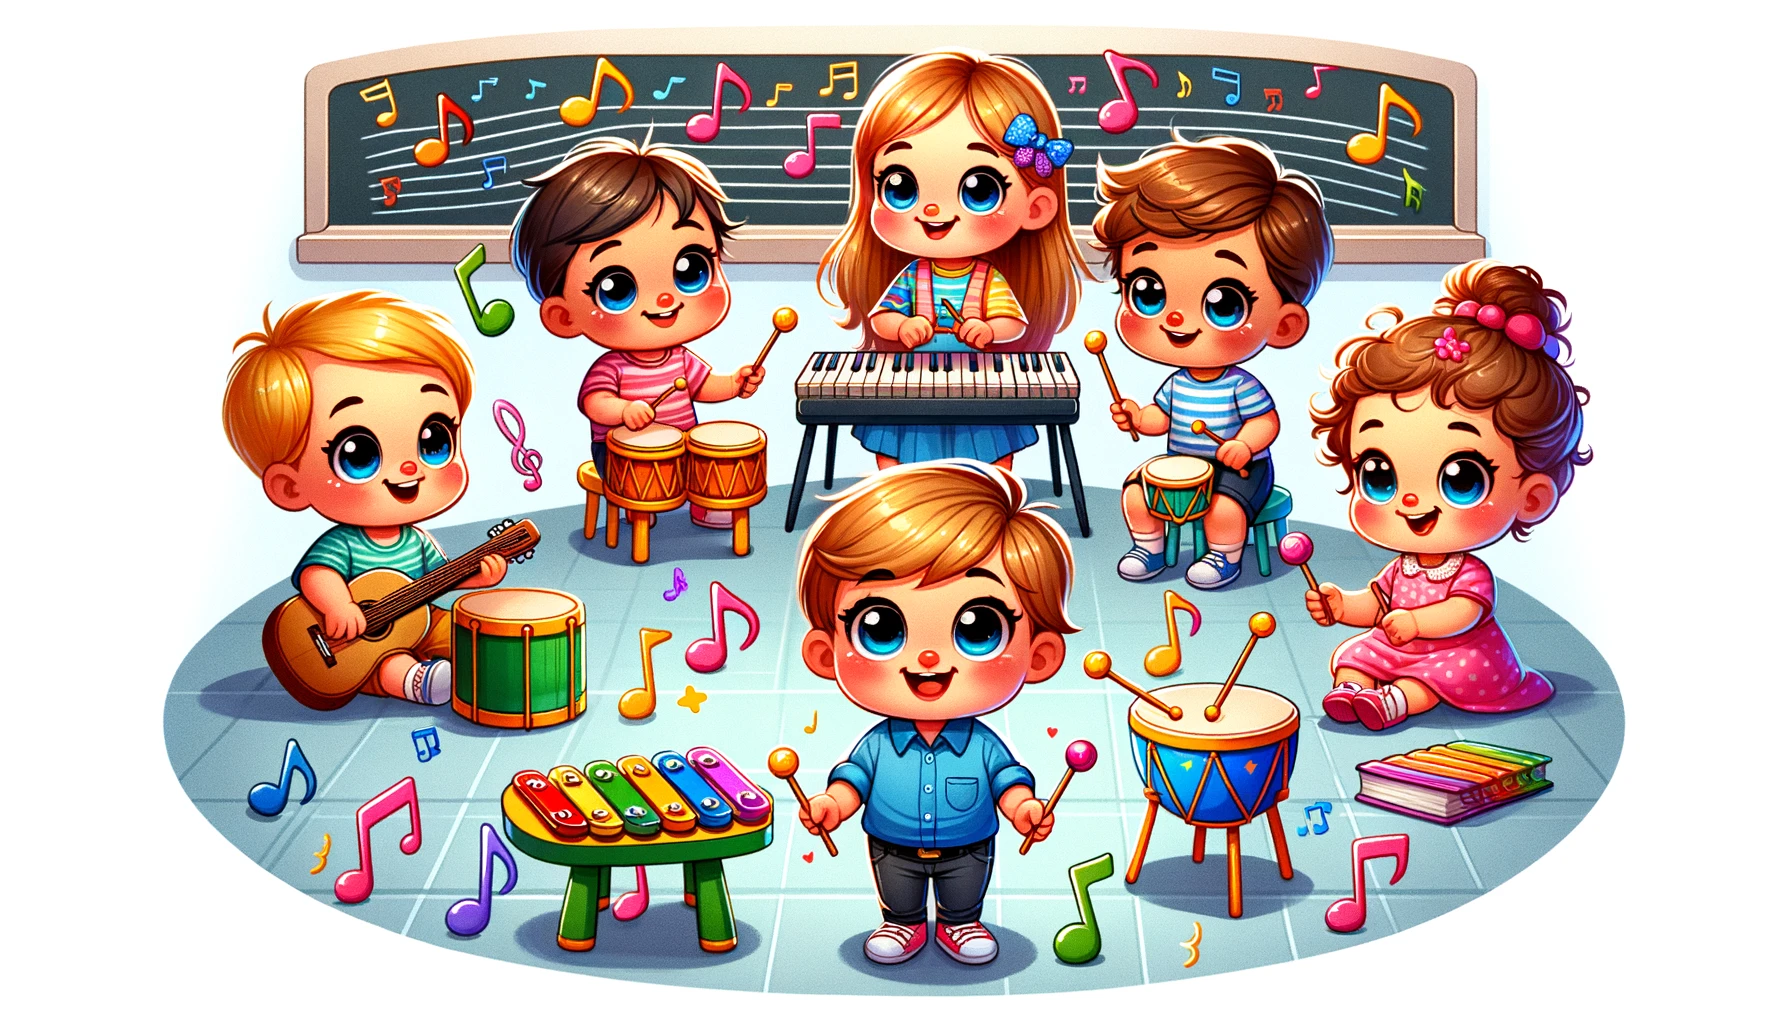 A group of animated toddlers enjoying a music class, with one playing a guitar, others playing drums and xylophone, and a child playing a keyboard, all surrounded by colorful musical notes, representing one of the fun options for toddler classes in Raleigh NC and surrounding areas